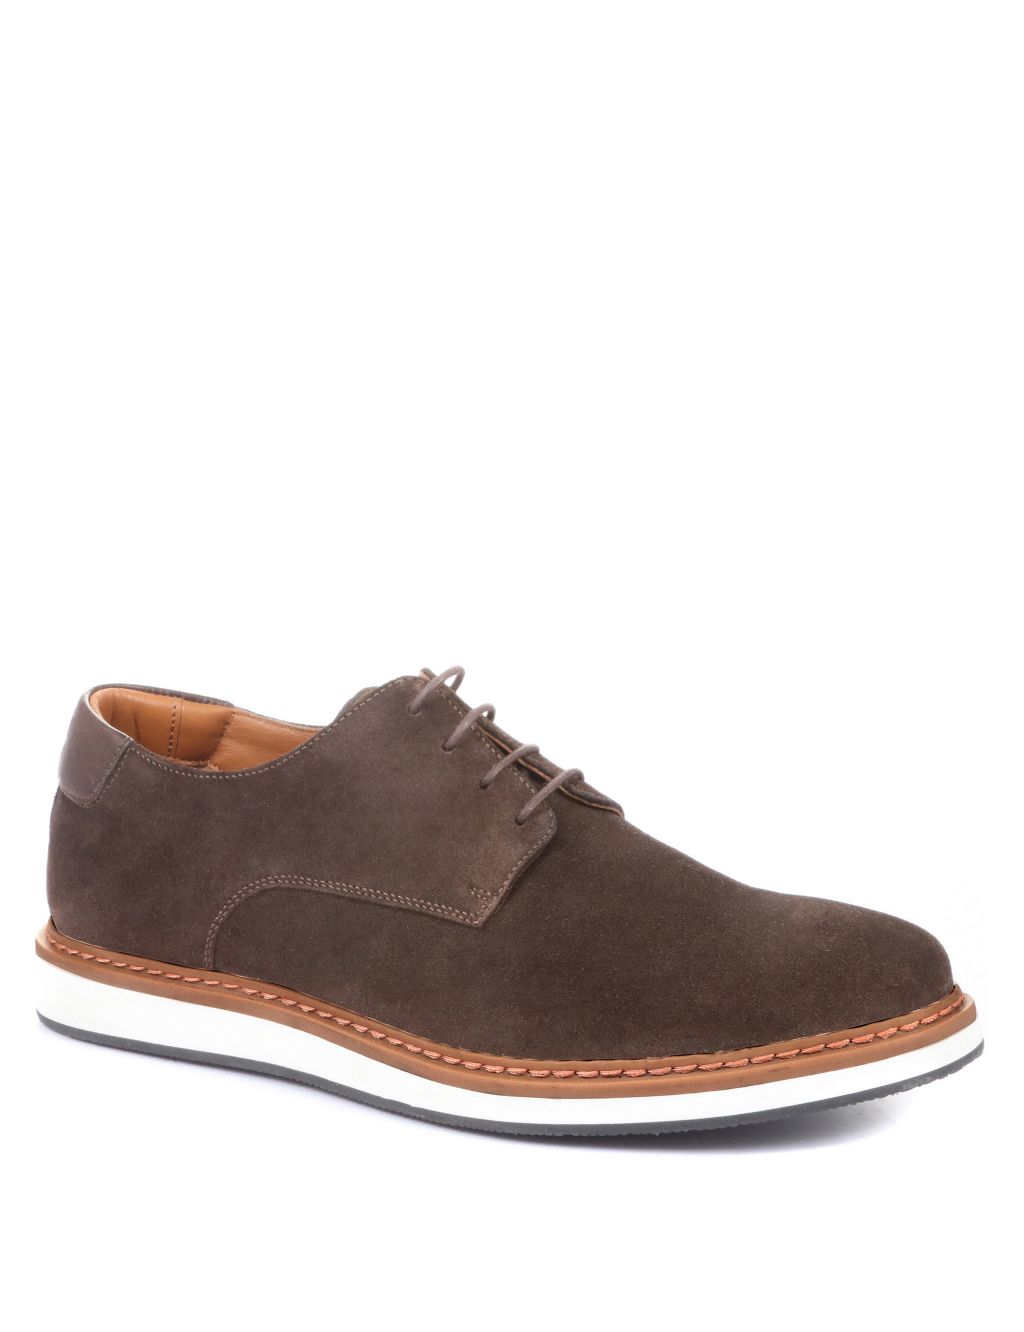 Suede Lace Up Casuals image 2